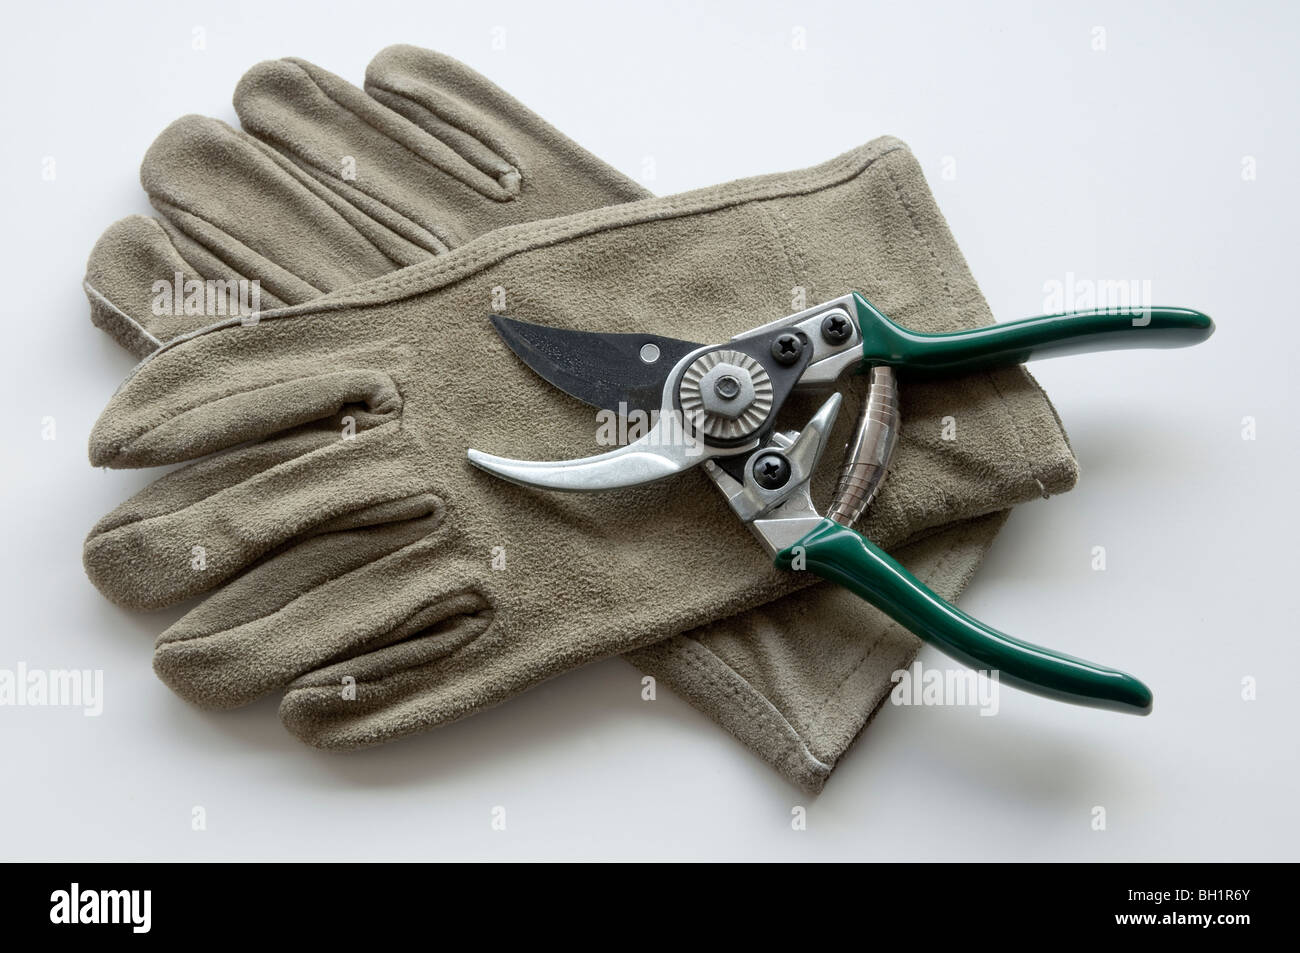 Gardening gloves and secateurs. Stock Photo